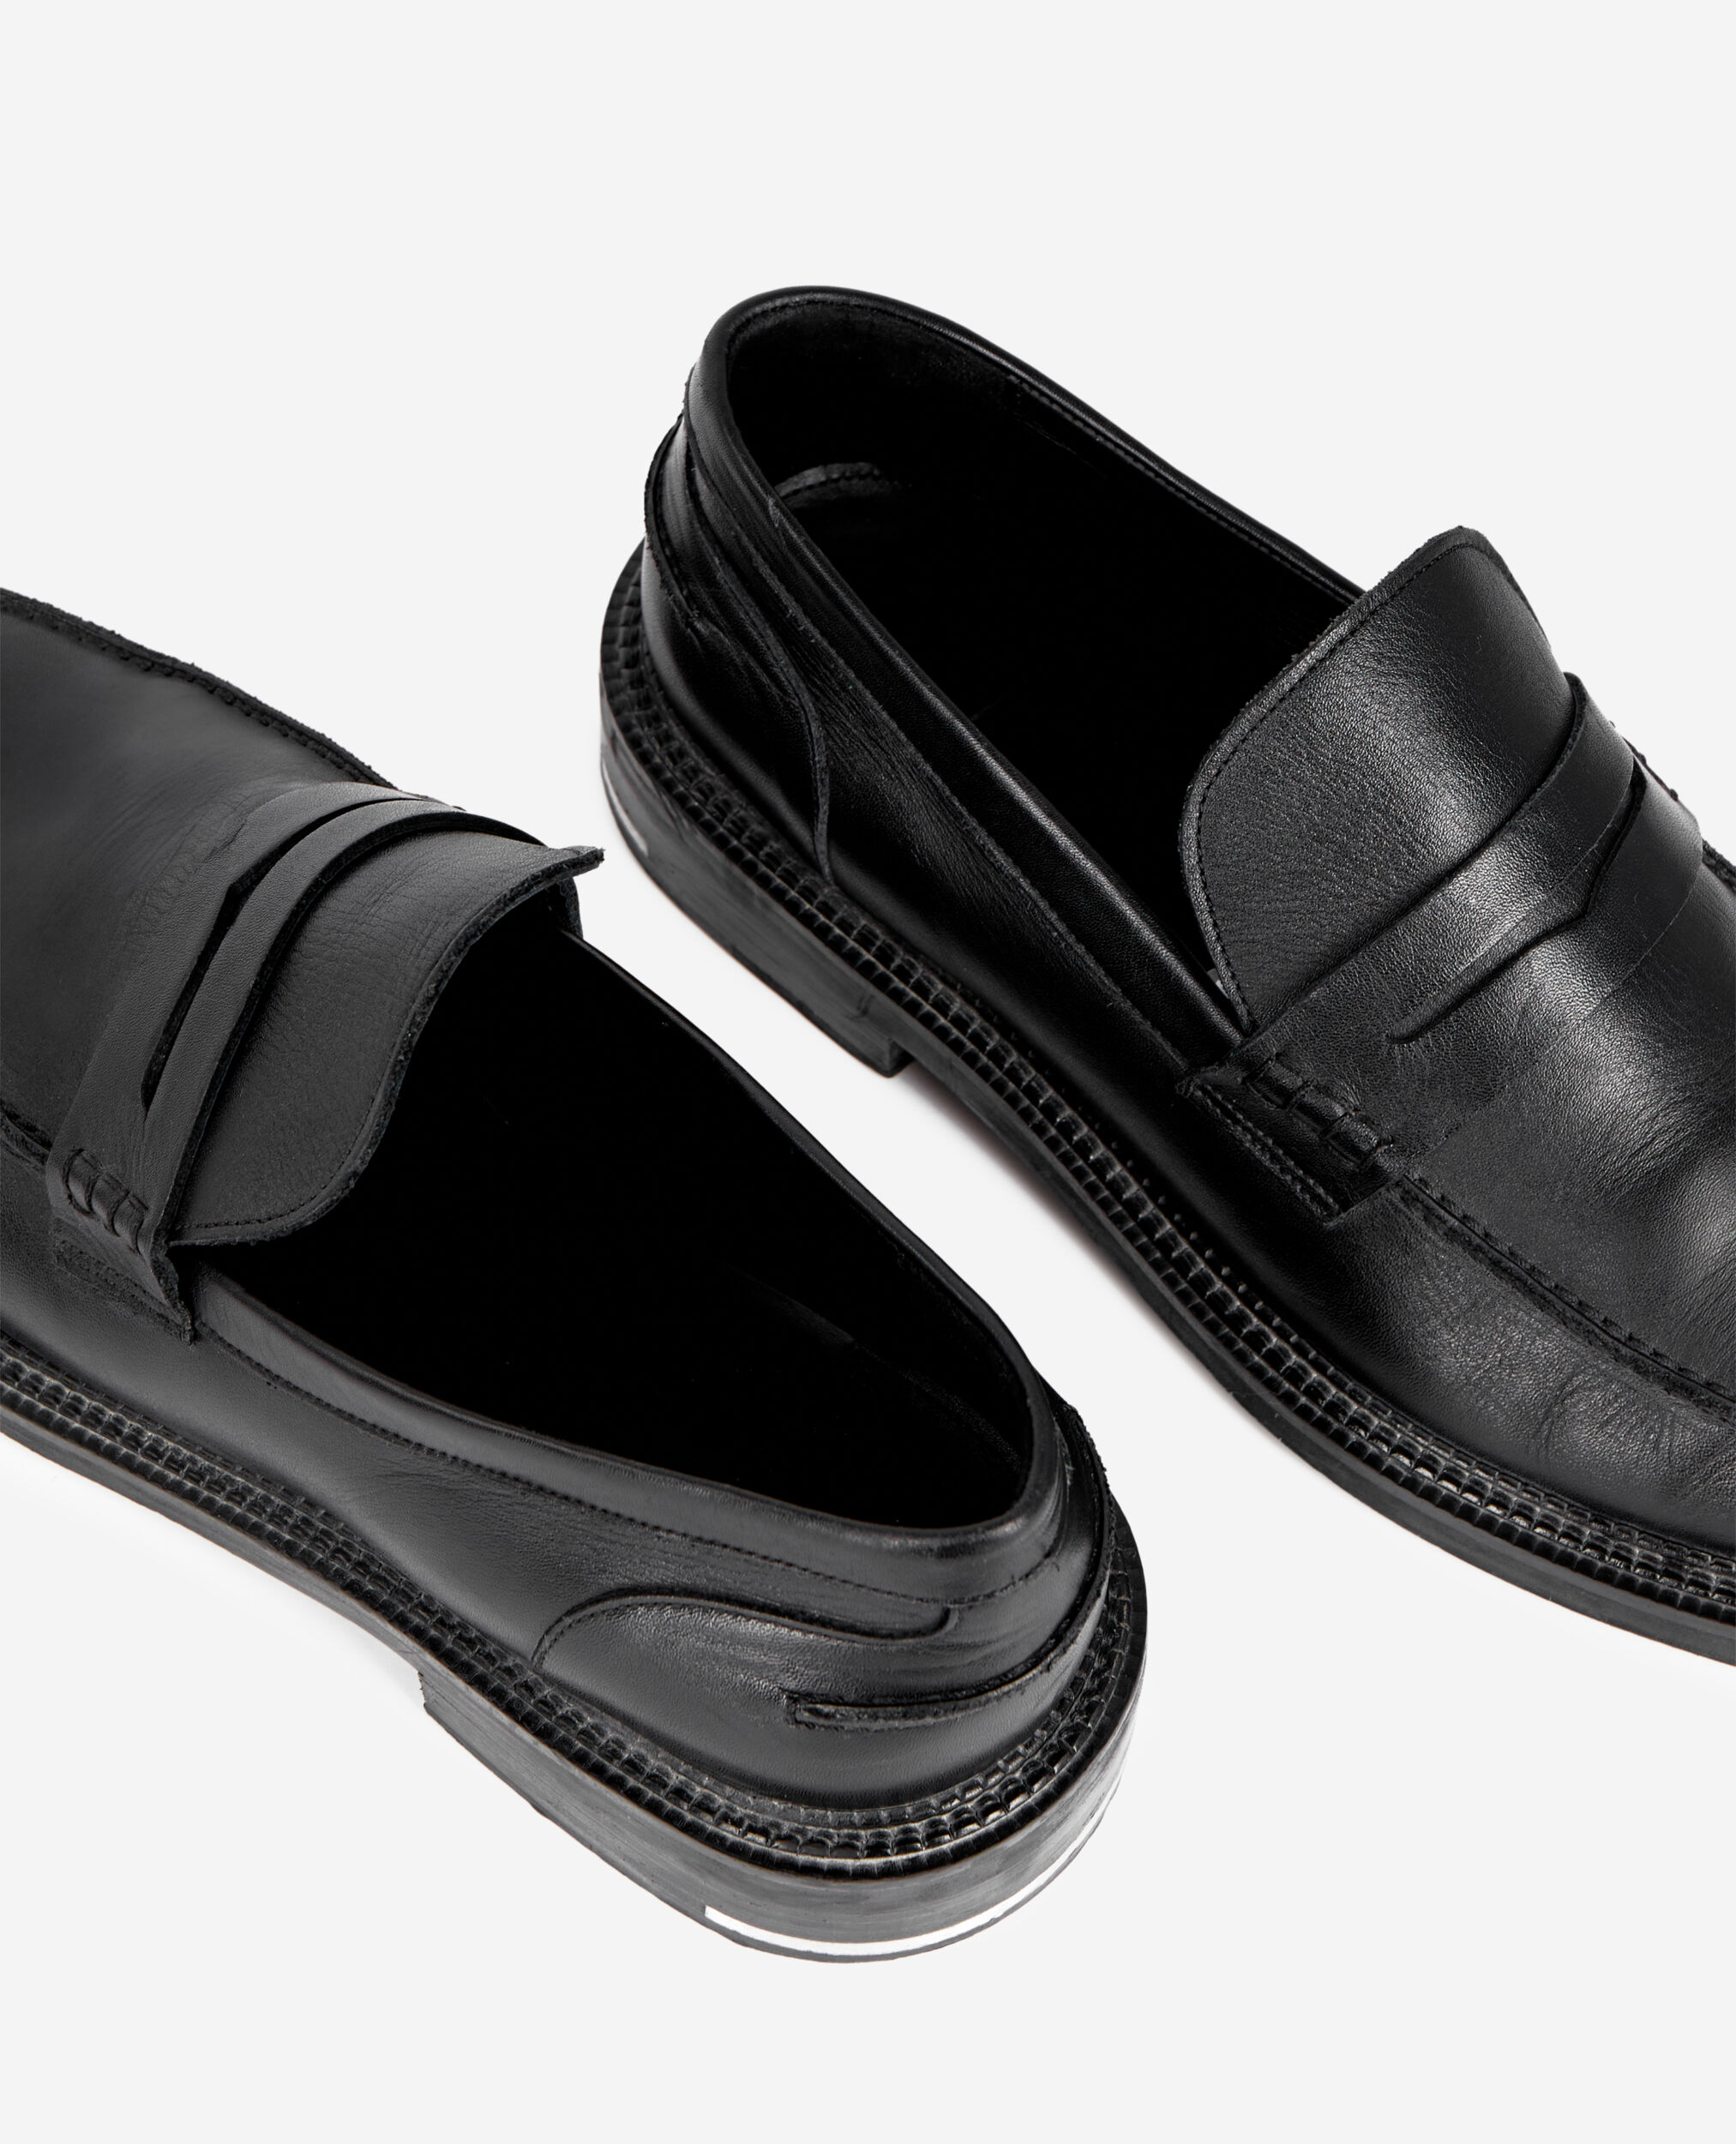 Penny loafers in black leather, BLACK, hi-res image number null